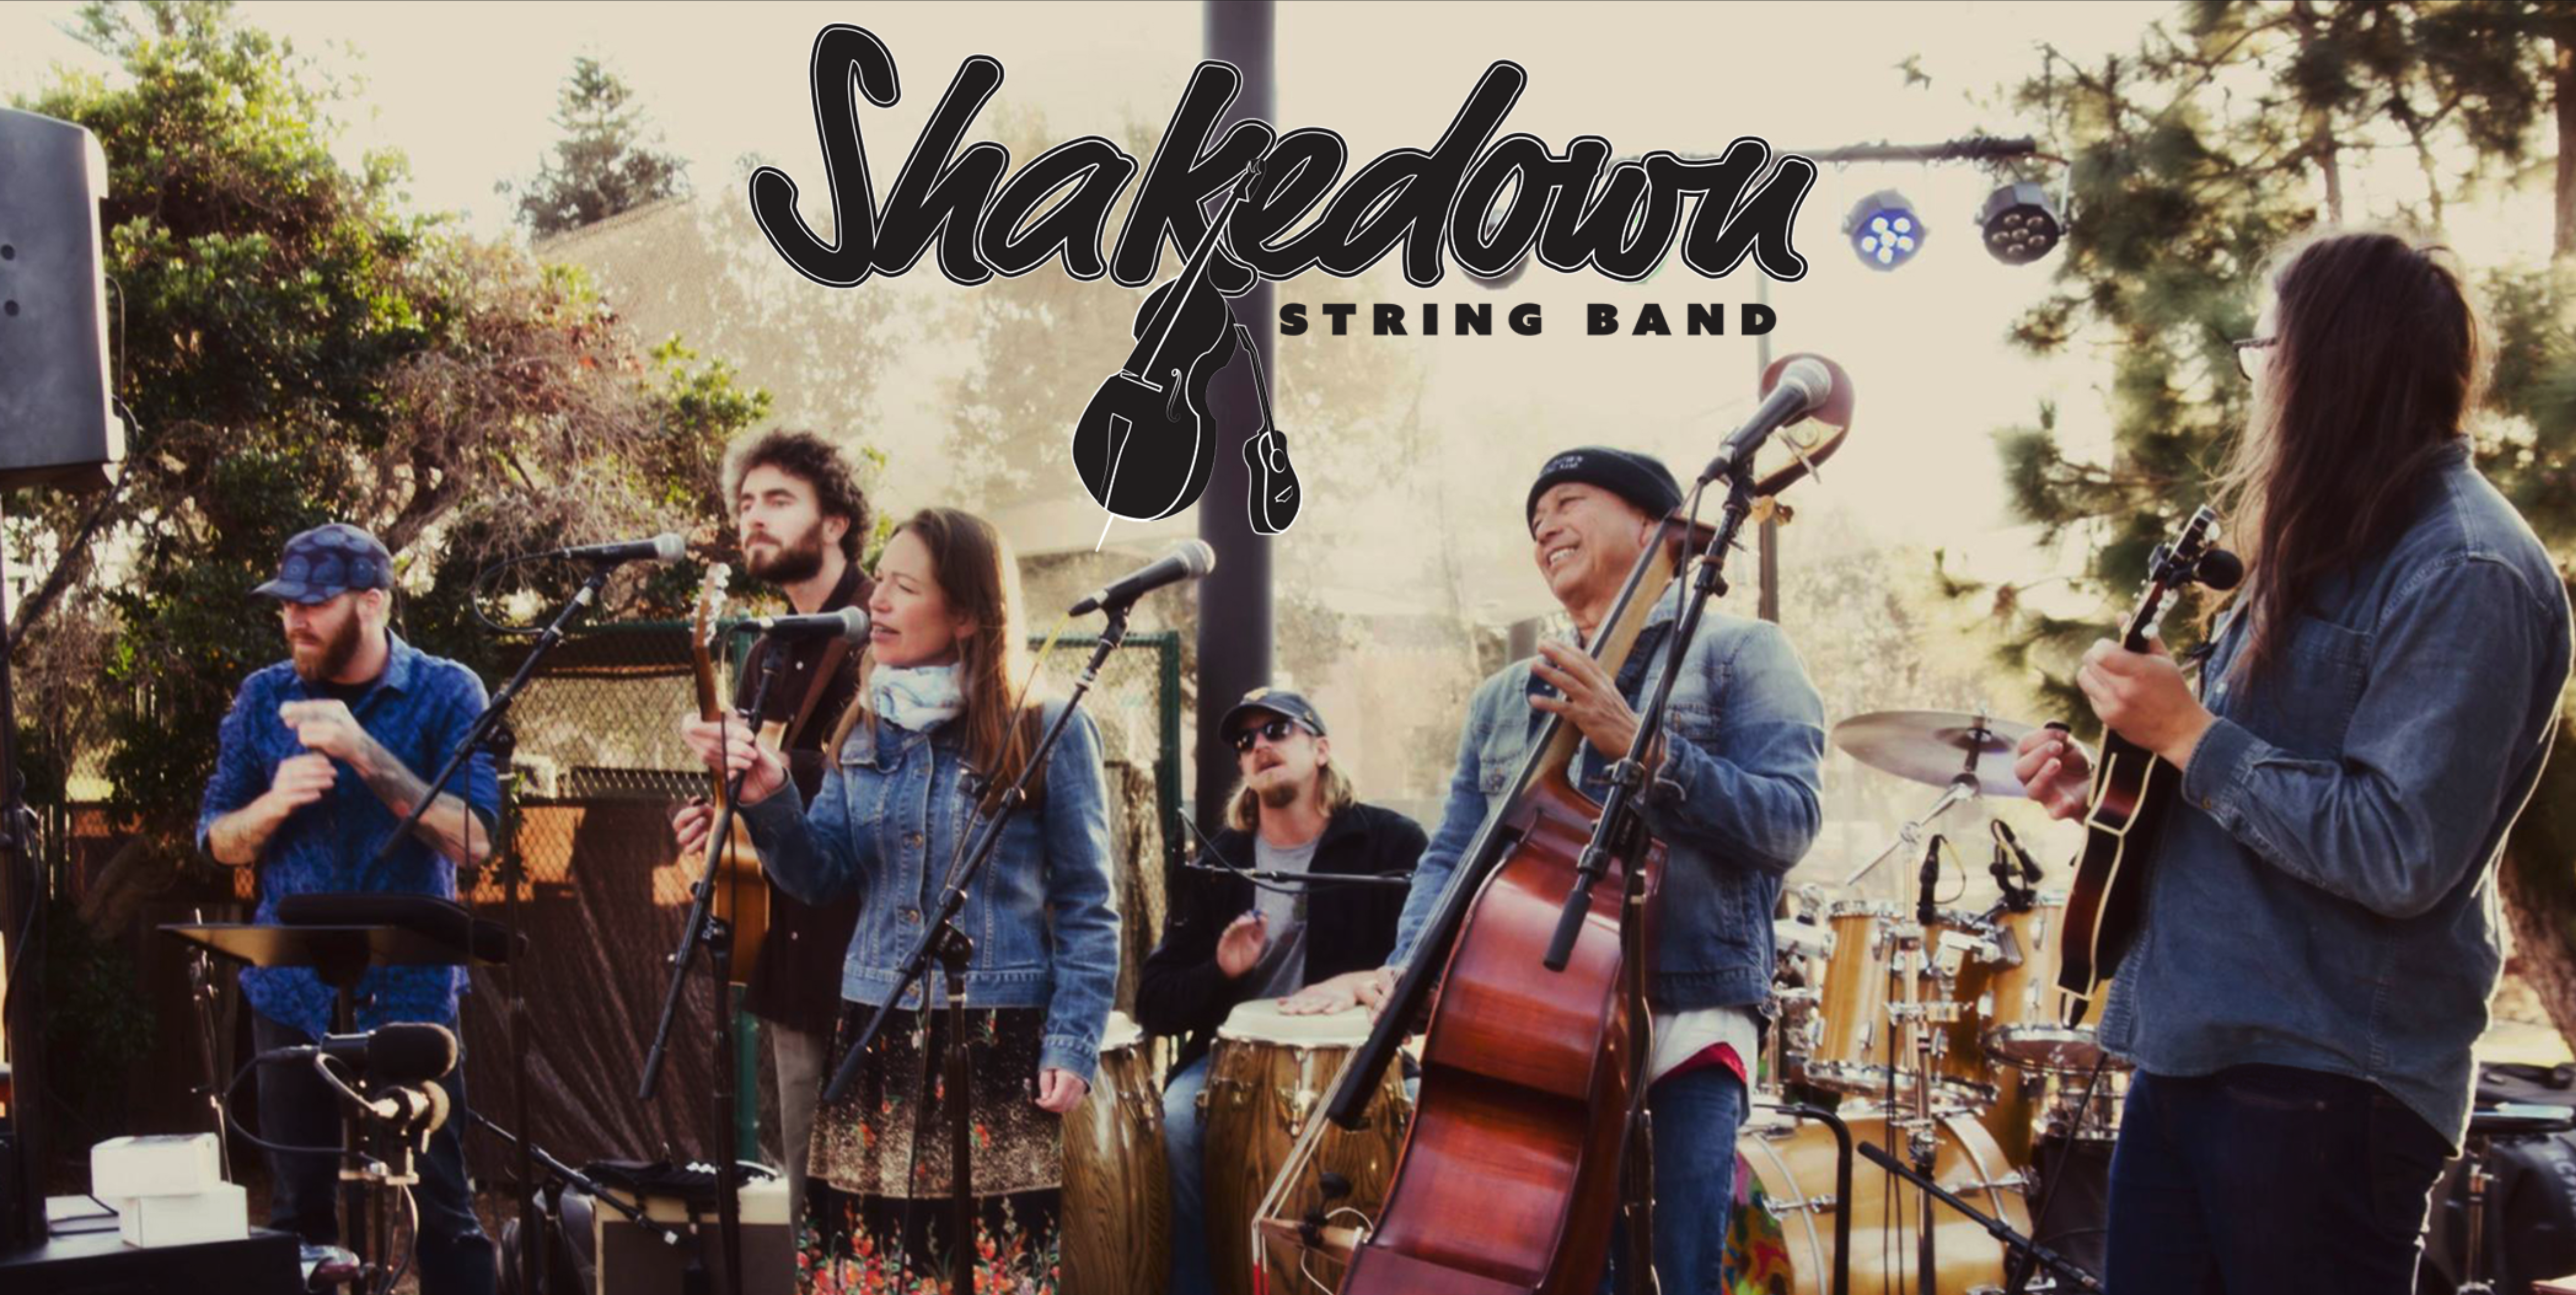 The Shakedown String Band San Diego Grateful Dead Cover